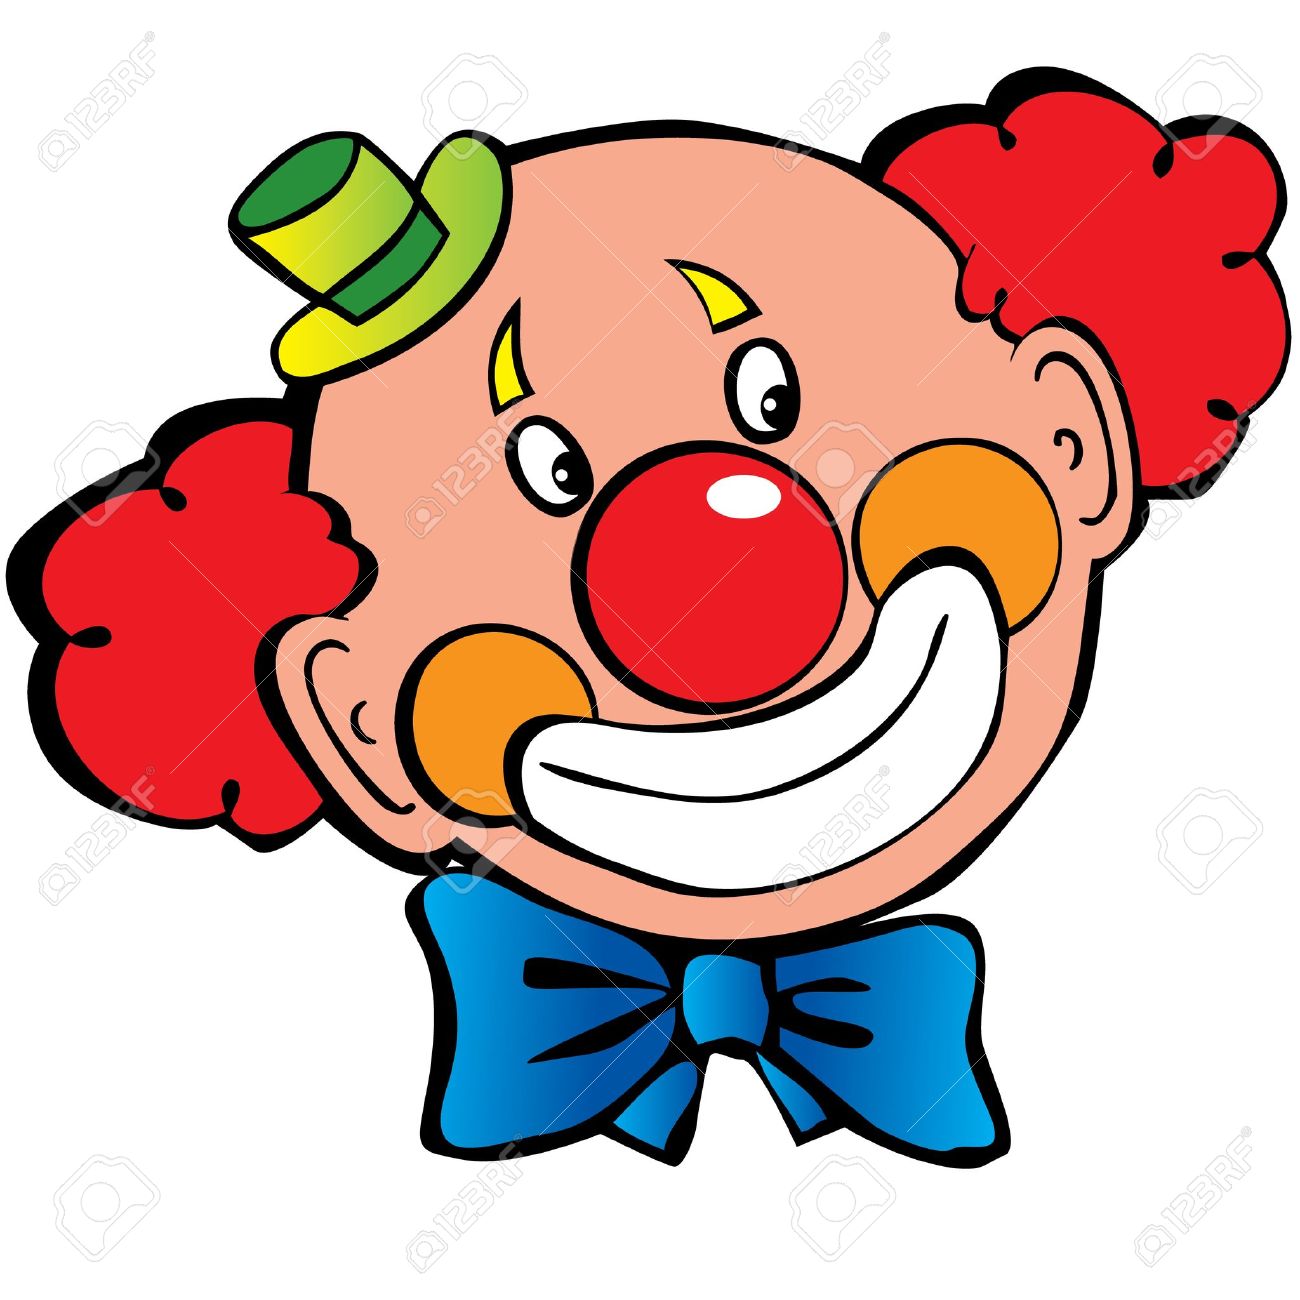 clown face: Happy clown art-illustration on a white background